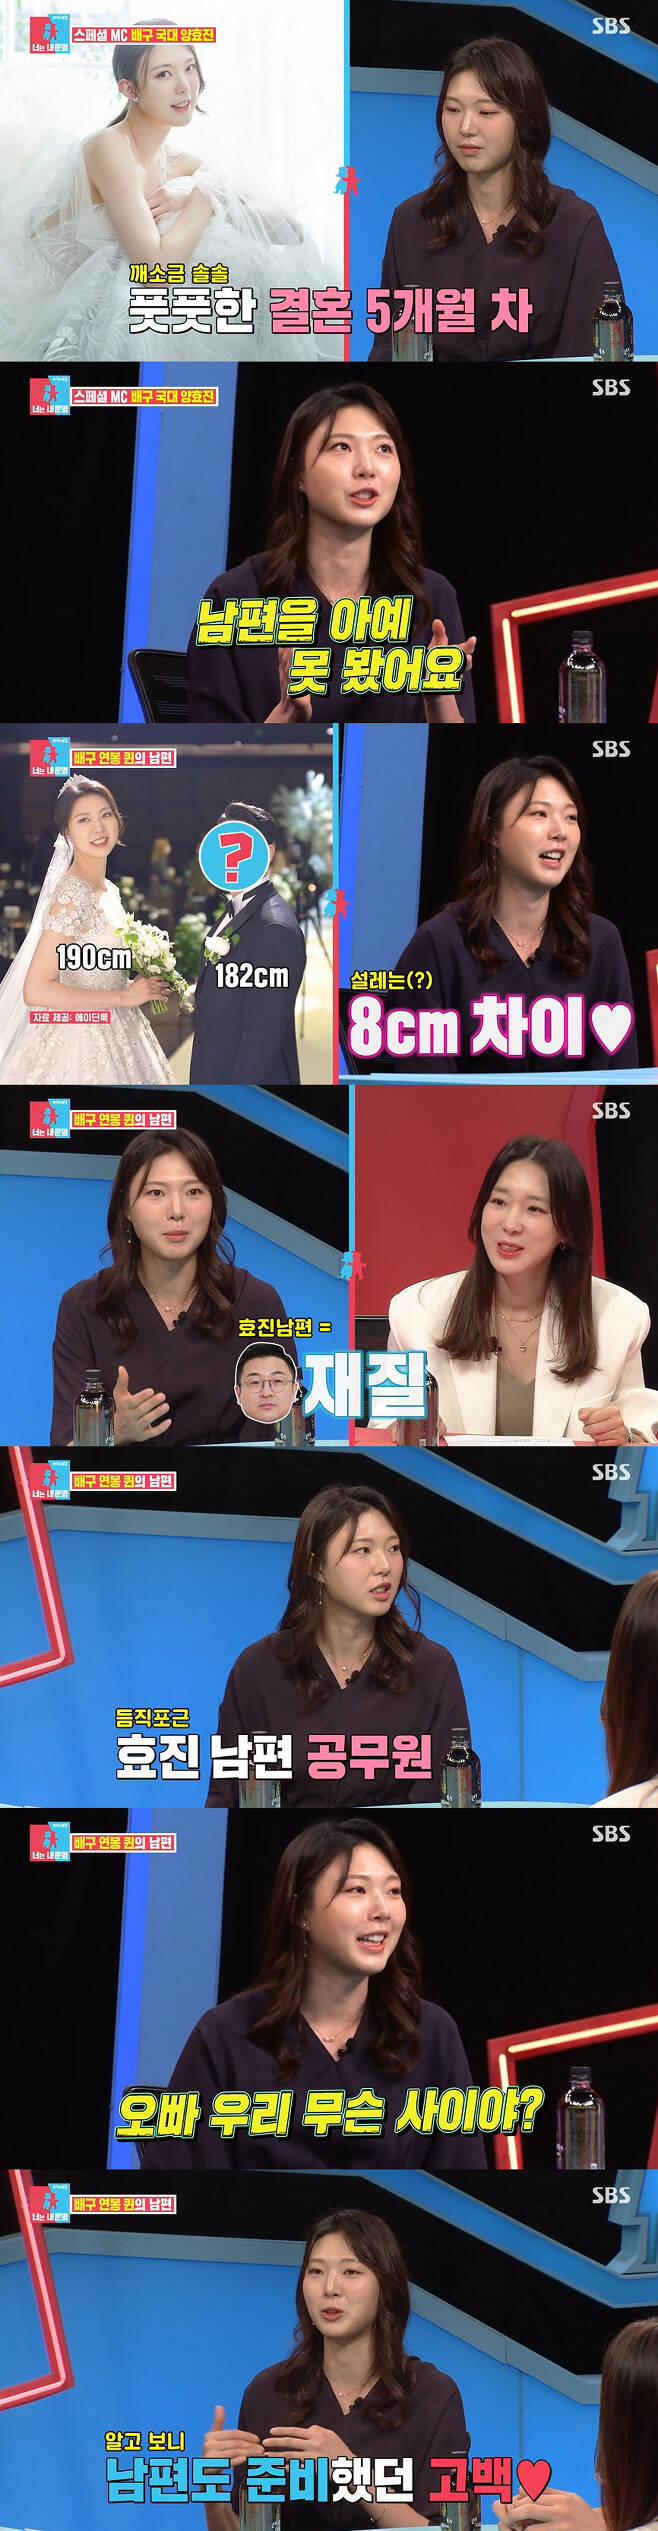 Womens volleyball national player Yang Hyo-jin has released a love story with Husband.On the 20th SBS Same Bed, Different Dreams 2 Season 2 - You Are My Destiny, volleyball player Yang Hyo-jin appeared as a special MC.Yang Hyo-jin, who marriaged in April after four years of devotion, asked about his honeymoon life on the day, I could not see Husband at all because of marriage and Tokyo Olympic Games.Yang Hyo-jin, a 190cm tall man, said when asked about Husbands height: 182cm.Honestly, it is a big person with a normal person, but it is a little bit like that when I am next to me. I am very sensitive to my personality, but when I look at it, I get really sensitive when I exercise. But Husband has a lot of personality.Its like a bear, and its a style that accepts everything, he explained.Yang Hyo-jin, who met Husband, an official of four years old, on a blind date, said, I have a personality that is different from what I see.I have to do it quickly when I work, and Husband is a relaxed style. So I think I have to make a conclusion by taking a thumb for three to four months. Yang Hyo-jin said, Husband takes me to the hostel by car, and I thought about this a hundred times.I feel good about each other, but I do not tell you clearly, so when I went to ask, What are we like, there was a static. I knew that I was going to be Confessions to me when I arrived, but I could not bear it and I was in a hurry. On the other hand, Yang Hyo-jin, who has been keeping the title of Salary Queen for 9 years in Korea, showed affection for Kim Yeon-koung.Kim Sook said, Kim Yeon-koung is rumored to be self-proclaimed that he made Yang Hyo-jin as a salary queen.Yang Hyo-jin said, Yes, when I go out, I start with my acquaintances and tell my foreign coach that I am the annual salary queen.But frankly, I do not have a stake. I have learned a lot from the same room.I think there is 80% stake, he said, expressing his respect and affection for Kim Yeon-koung.